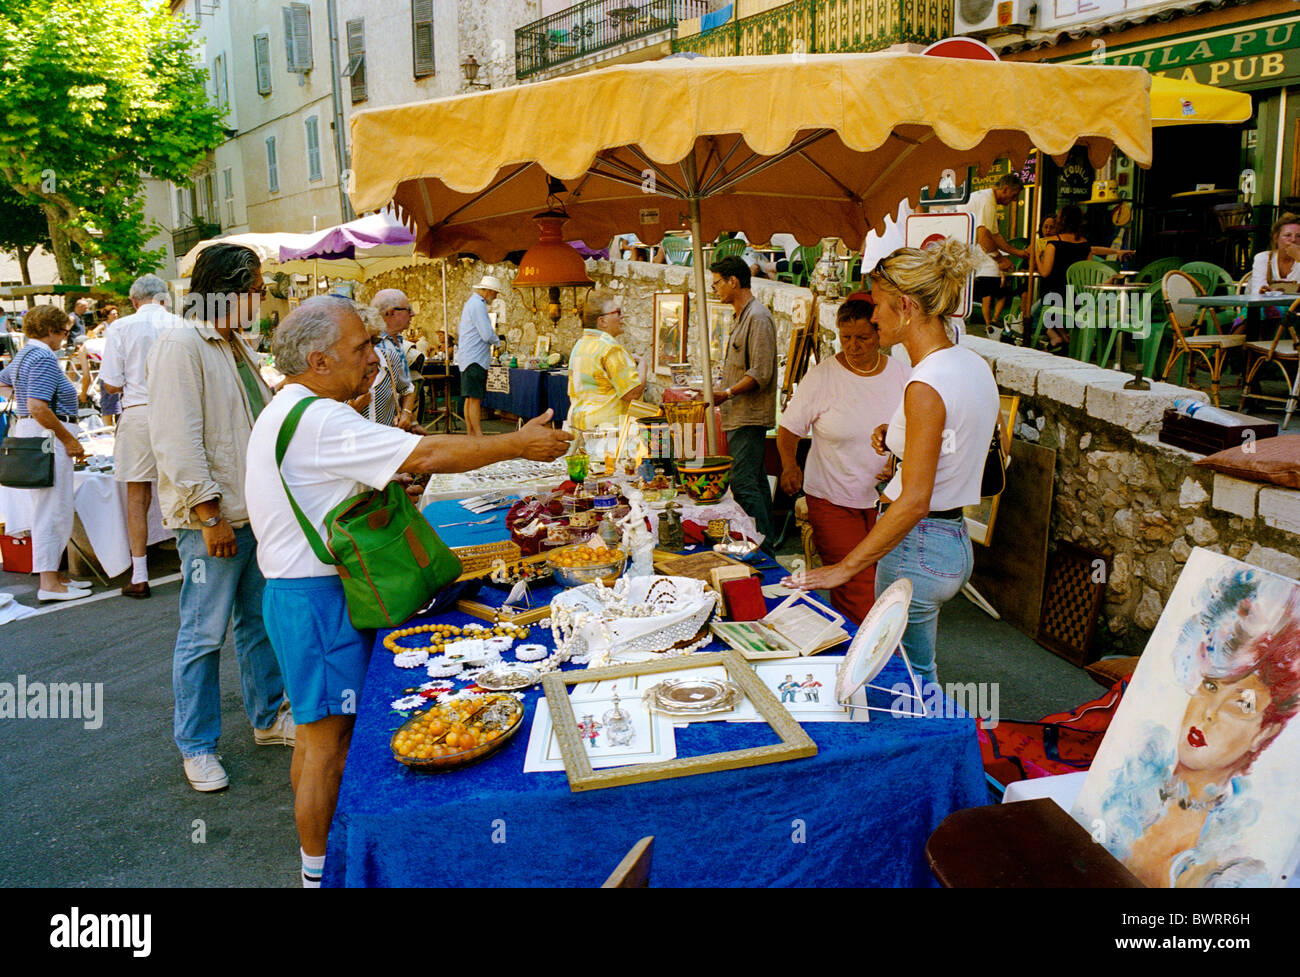 The street market in Antibes on the French Riviera is a great place to browse for antiques and bric-a-brac (brocante) Stock Photo